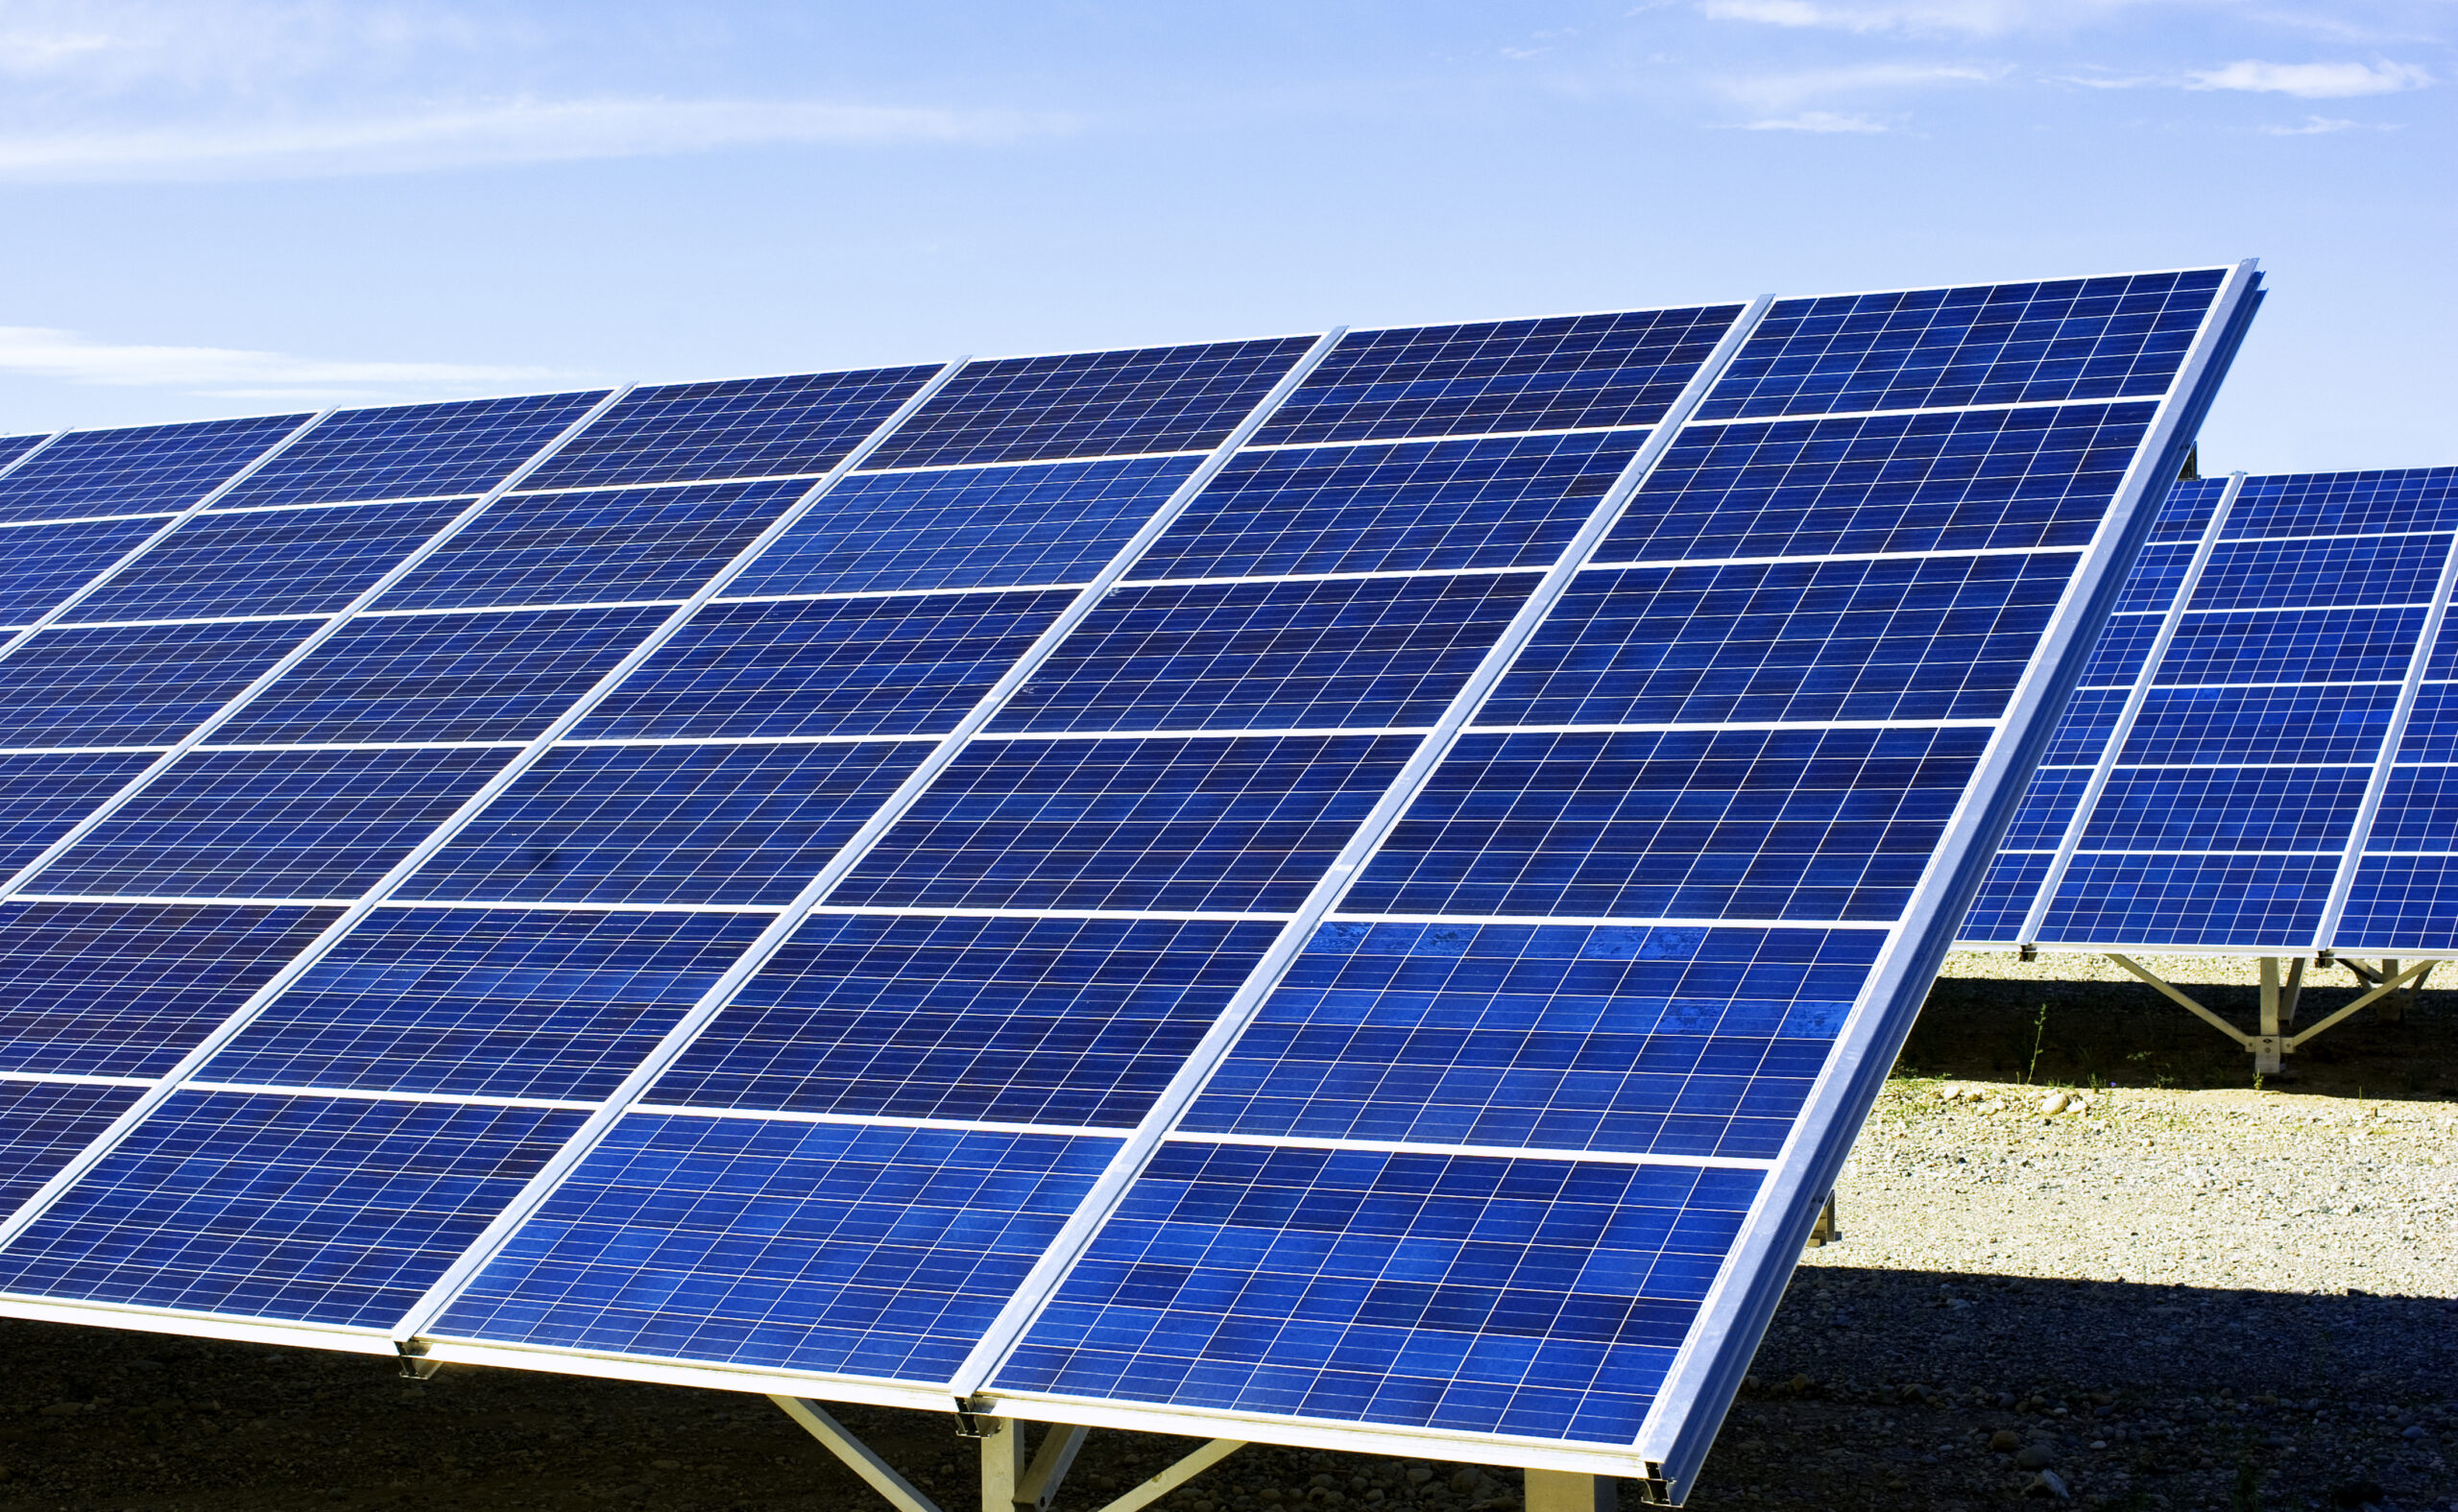 Whether it be residential, commercial, ground mounted solar systems are a great use of space.